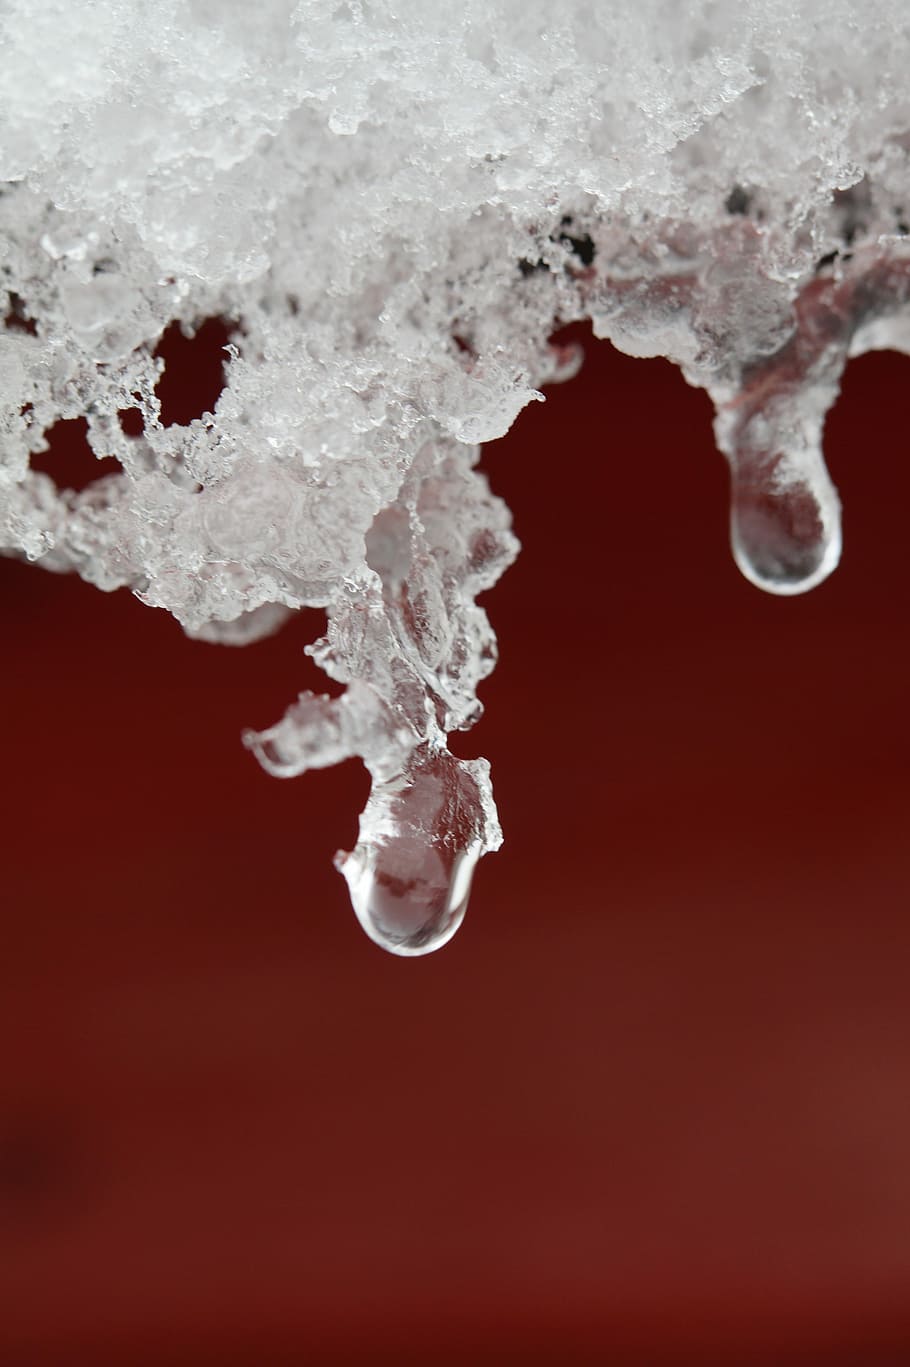 Snow, Ice, Winter, Wintry, Drip, Defrost, cold, iced, frozen, HD wallpaper